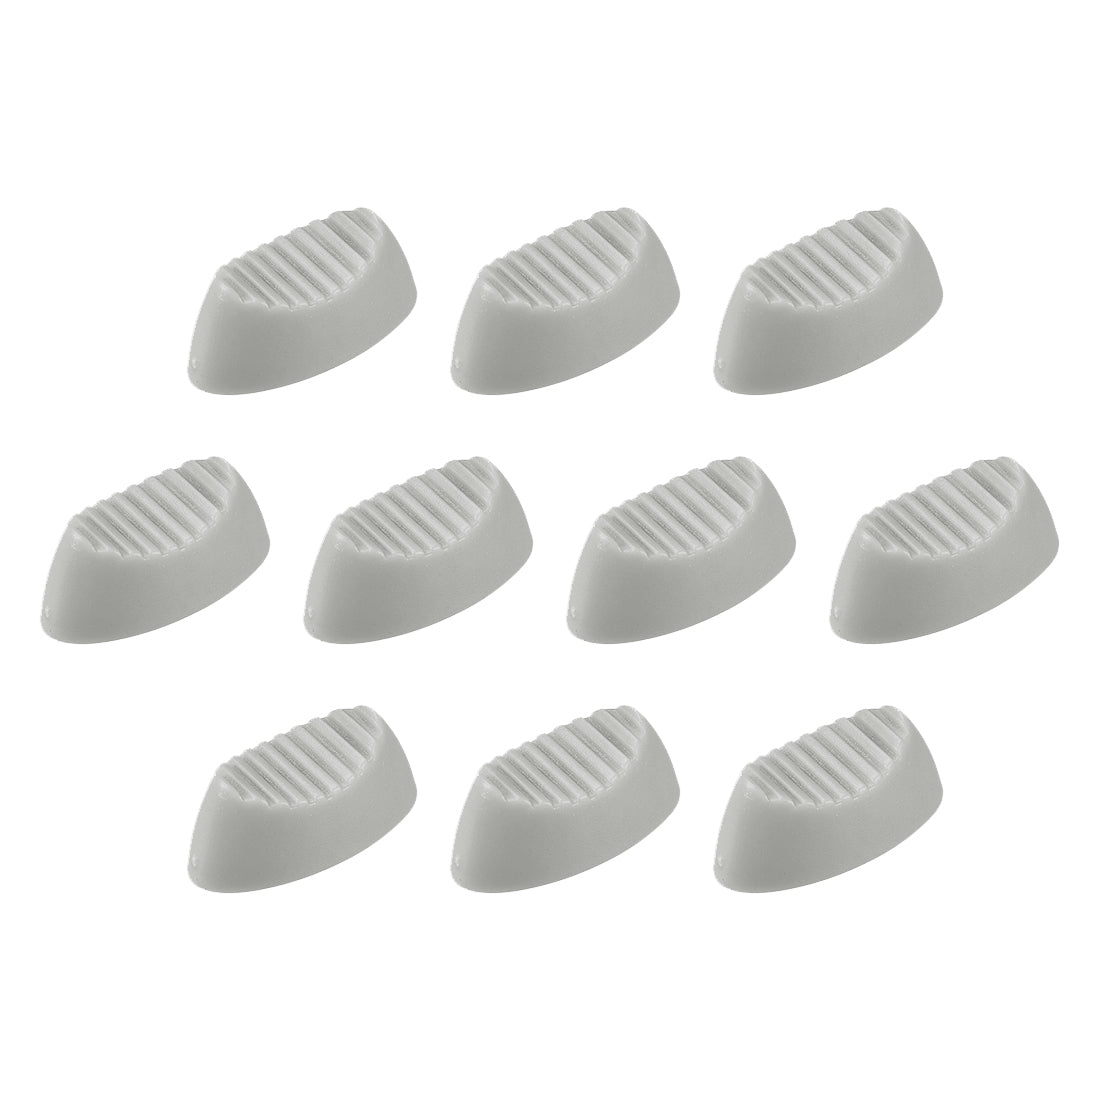 uxcell Uxcell 24mmx12mmx11mm Console Mixer Slider Fader Knobs Replacement for Potentiometer Grey10pcs